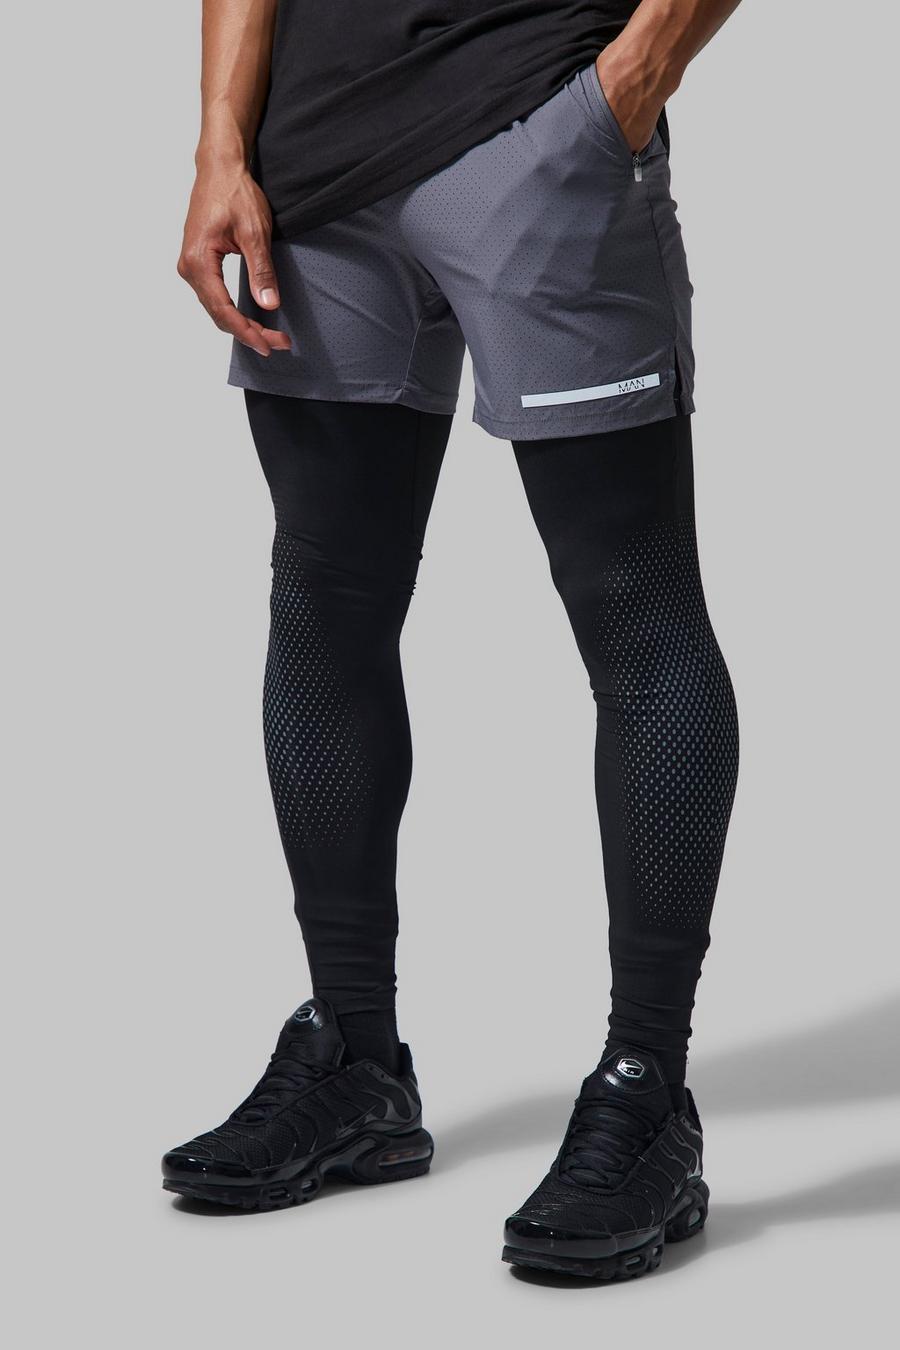 Legging Man Active 2 in 1 per alta performance, Charcoal image number 1